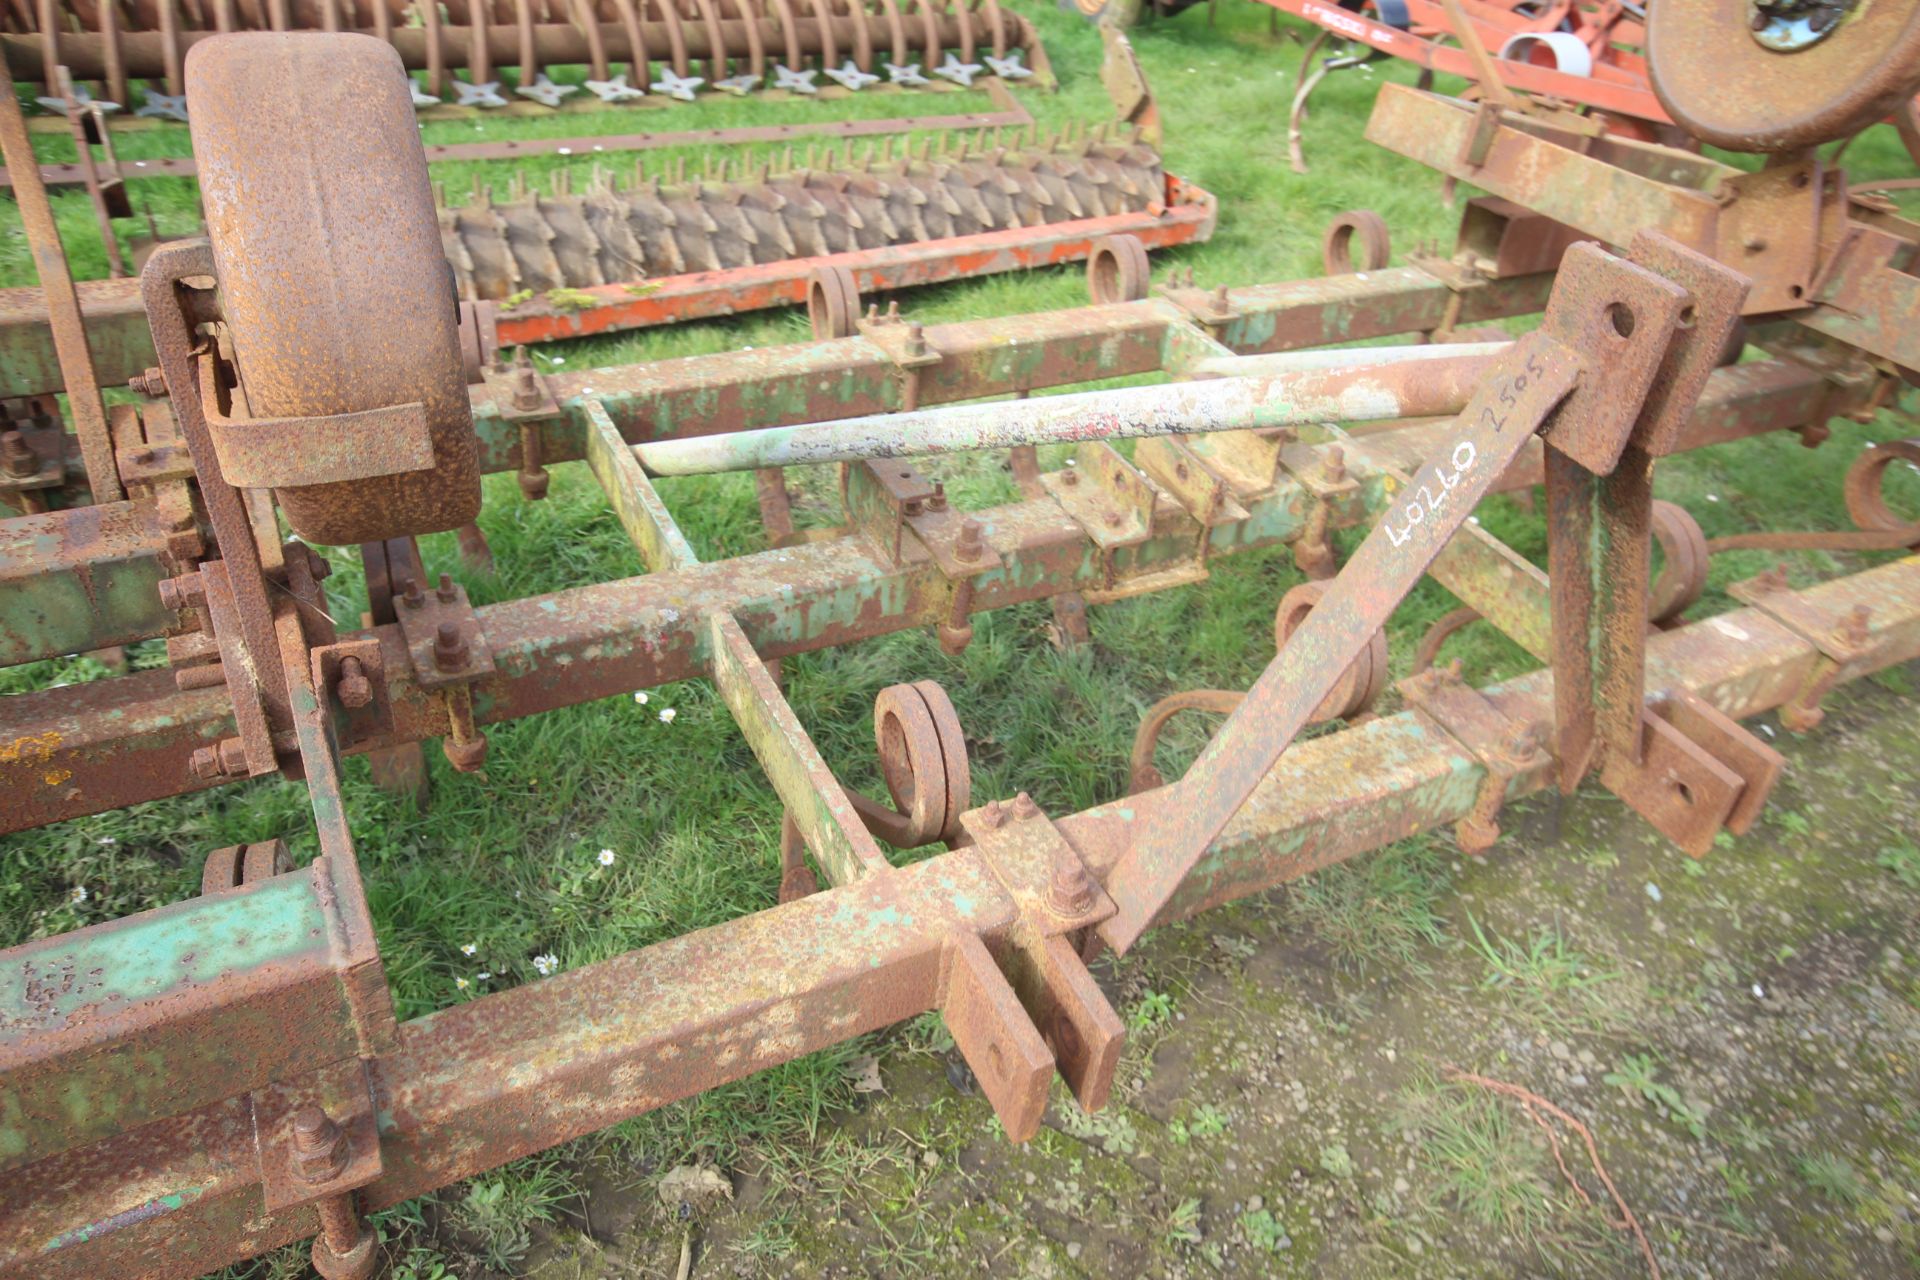 6m manual fold pigtail cultivator. - Image 14 of 14